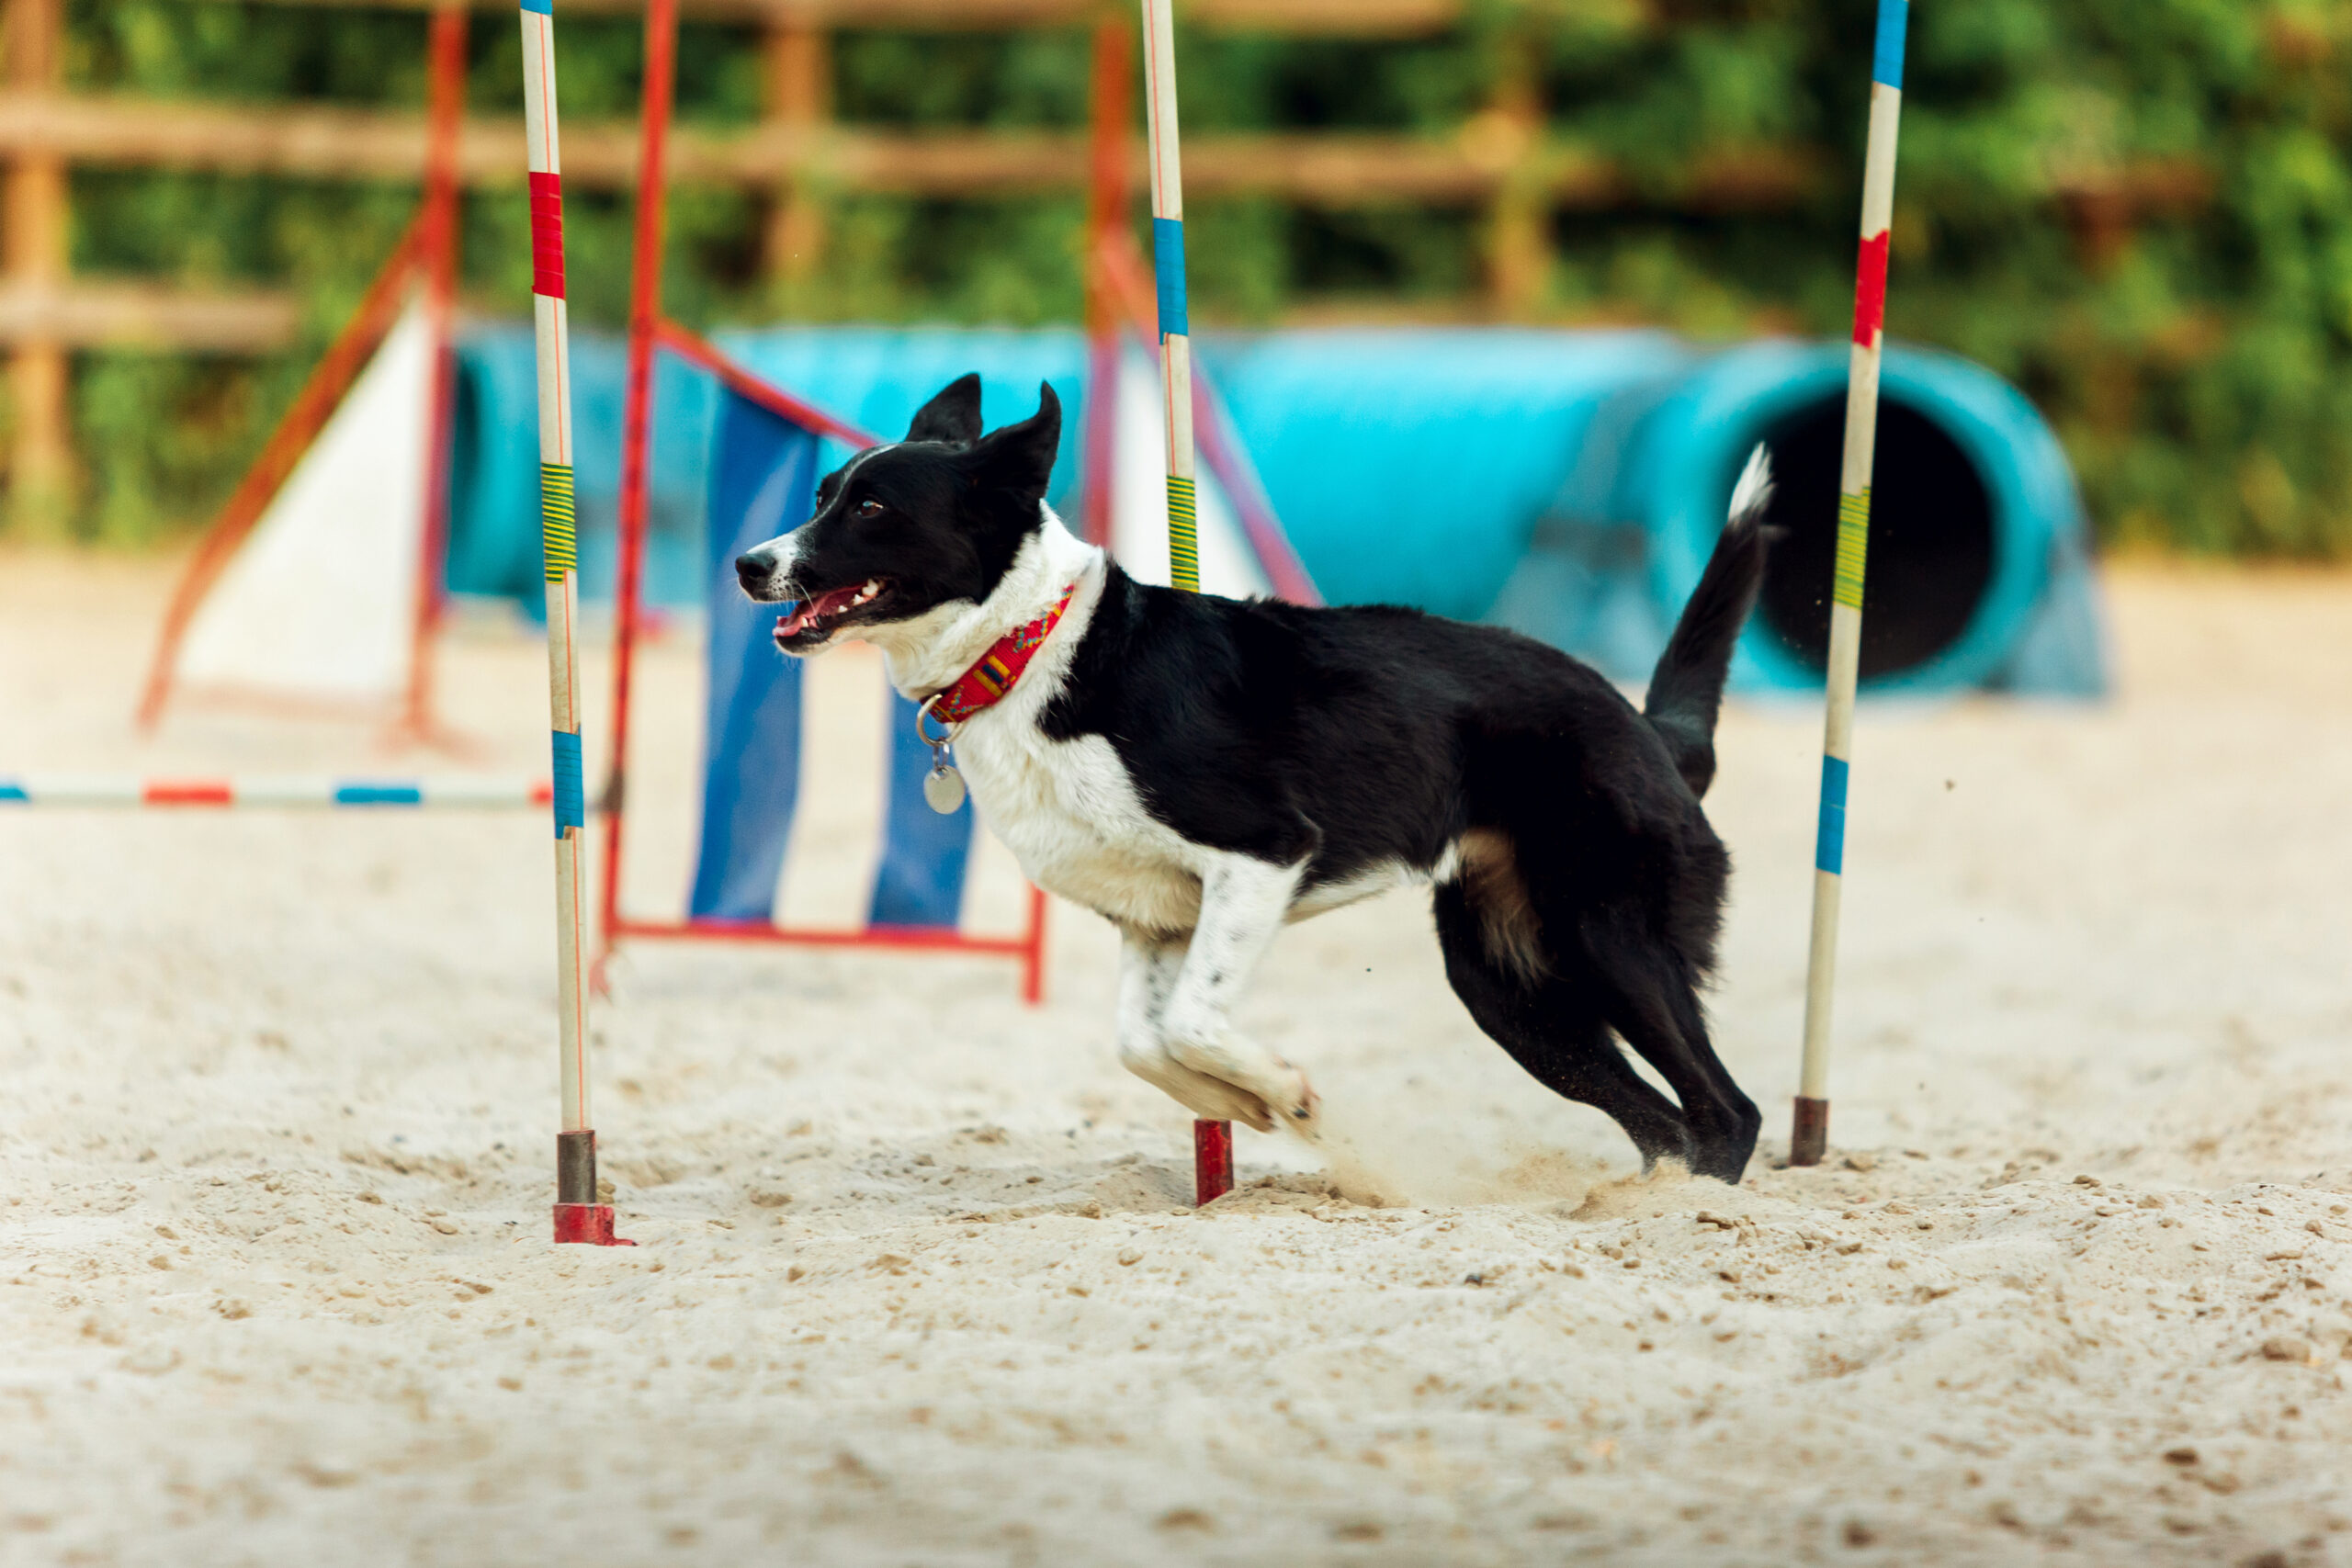 Sportive dog performing during the show in competition